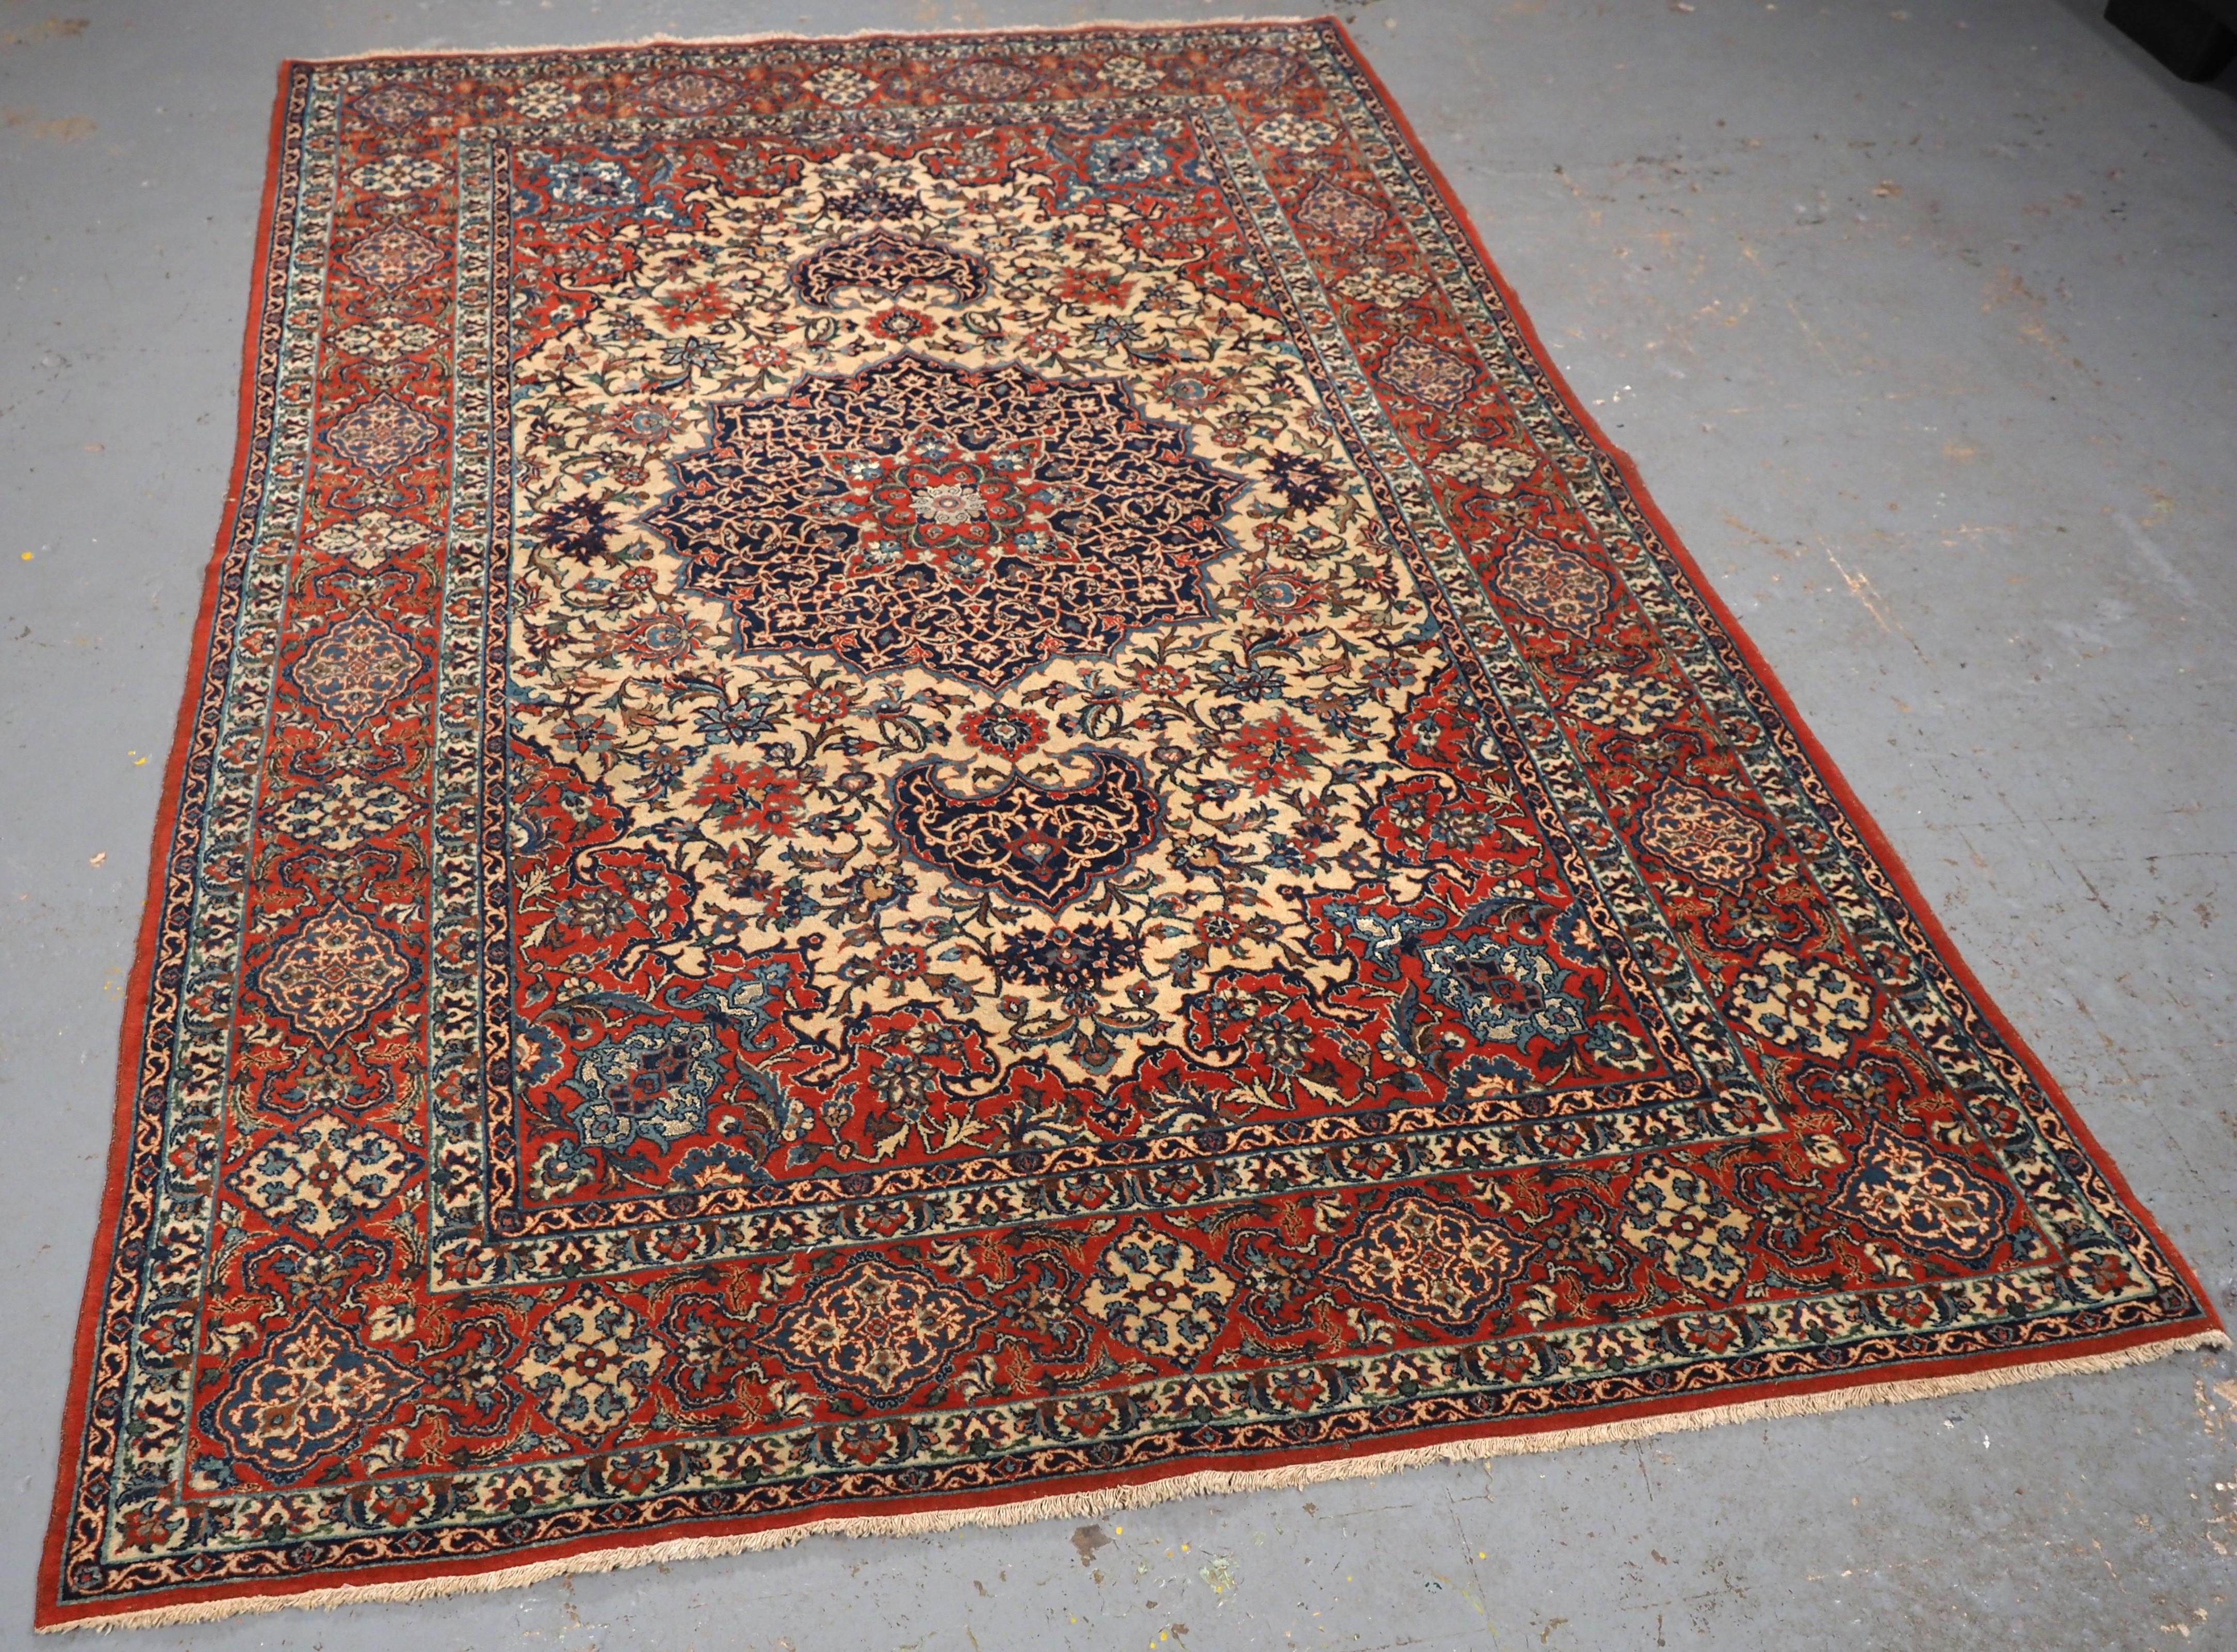 Size: 6ft 11in x 4ft 9in (210 x 145cm).

Antique Isfahan rug with small medallion design on an ivory ground.

Circa 1920.

The rug is of a fine weave with lambs wool pile on a fine cotton foundation, the rug has a floral design to the field, the rug